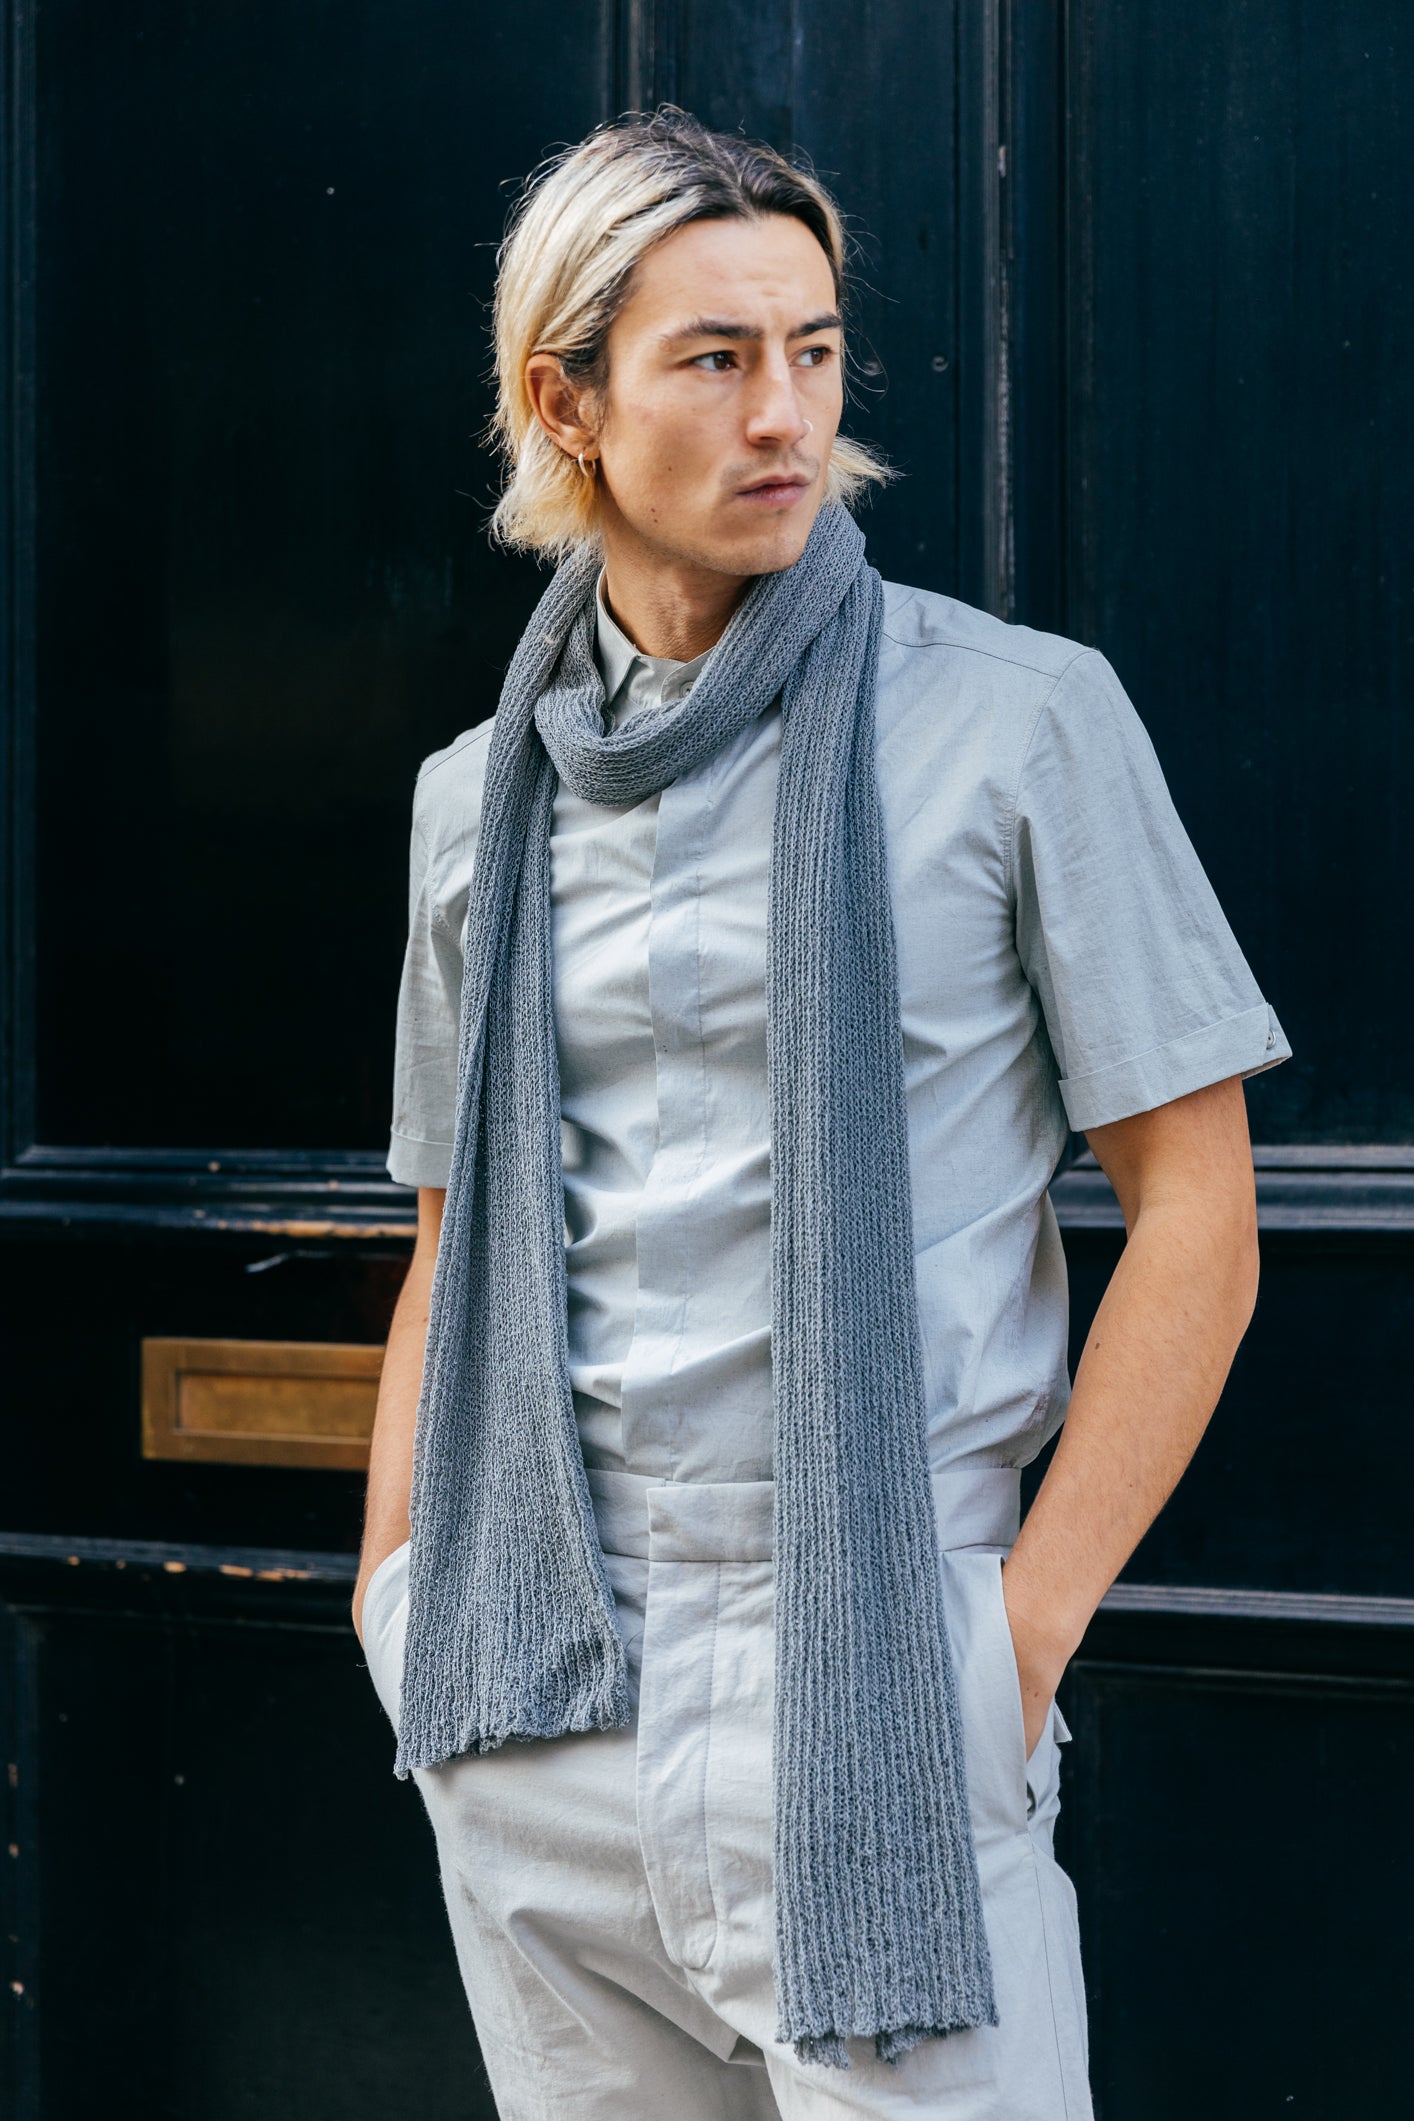 K-165 REFLECTIVE KNITTED SCARF